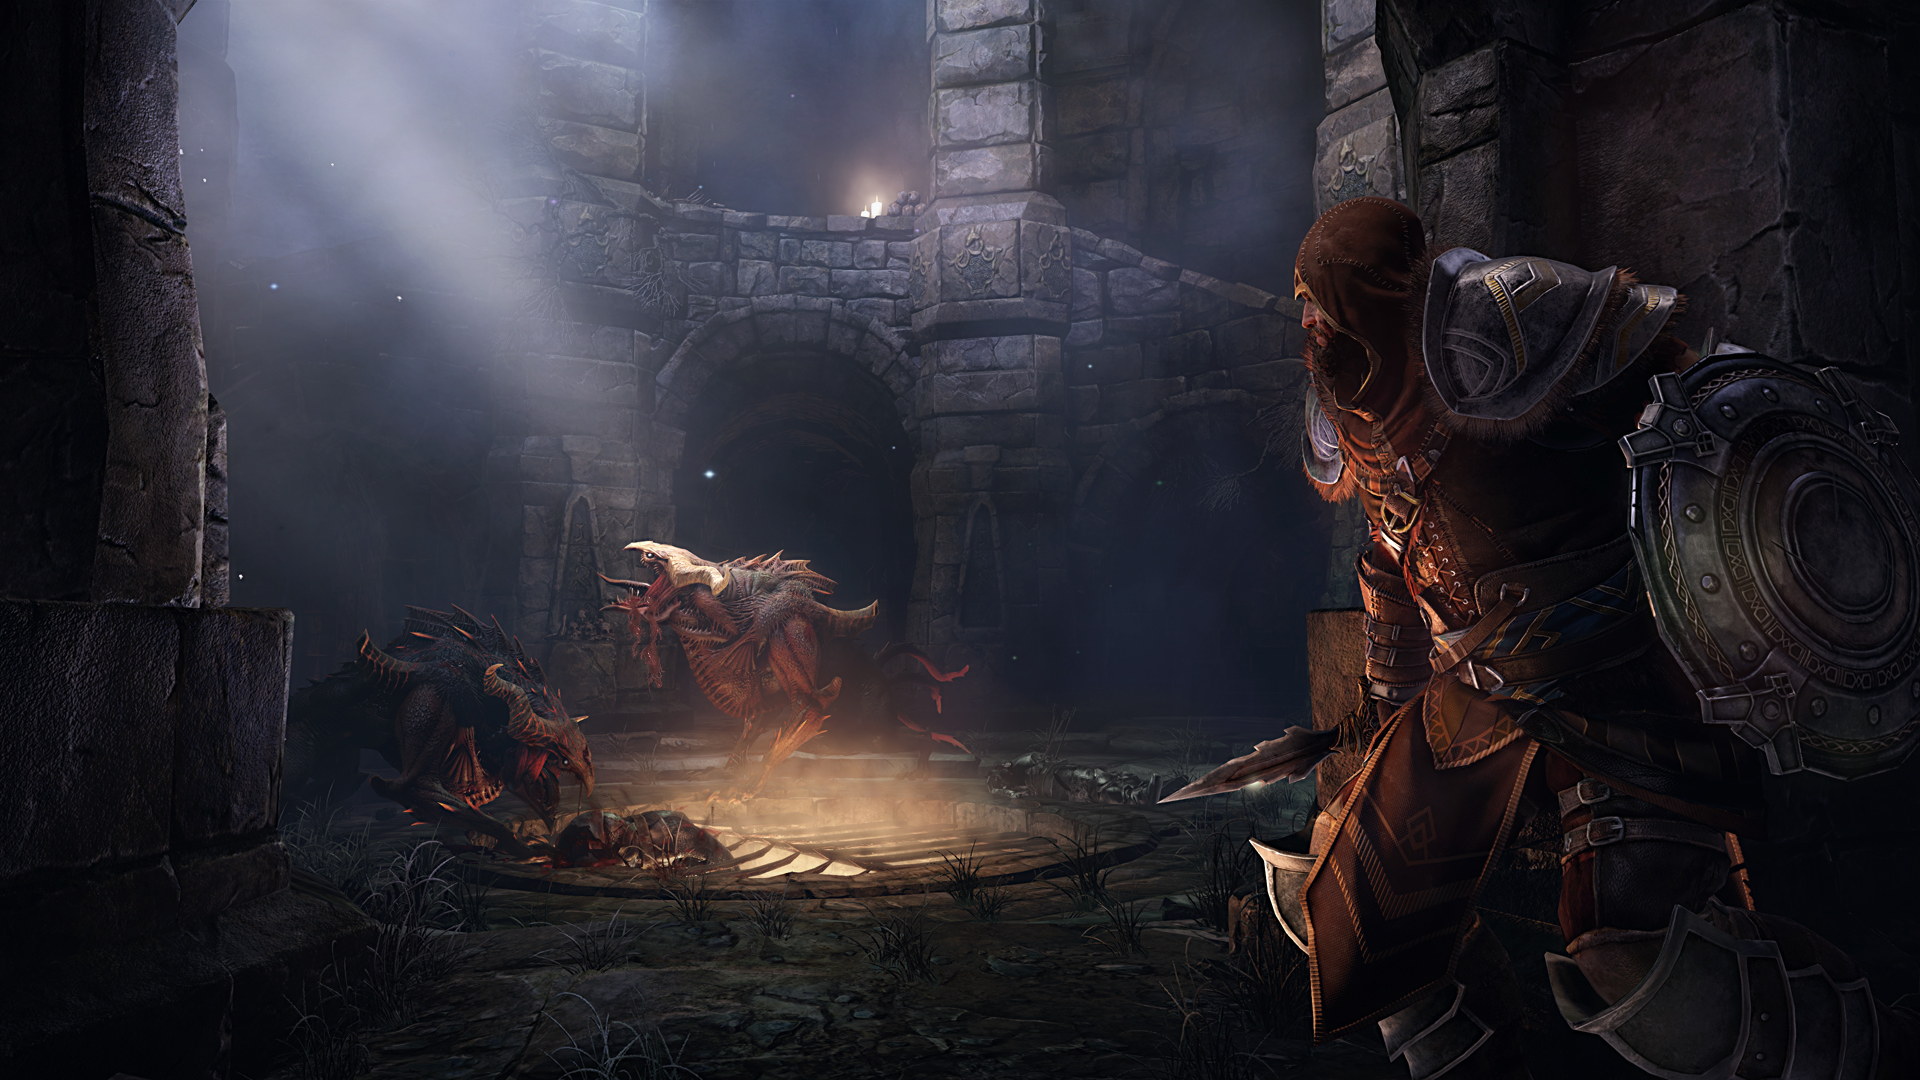 New Lords of the Fallen gameplay details highlight fluid soulsike combat  and seamless co-op – out Oct 13 – PlayStation.Blog